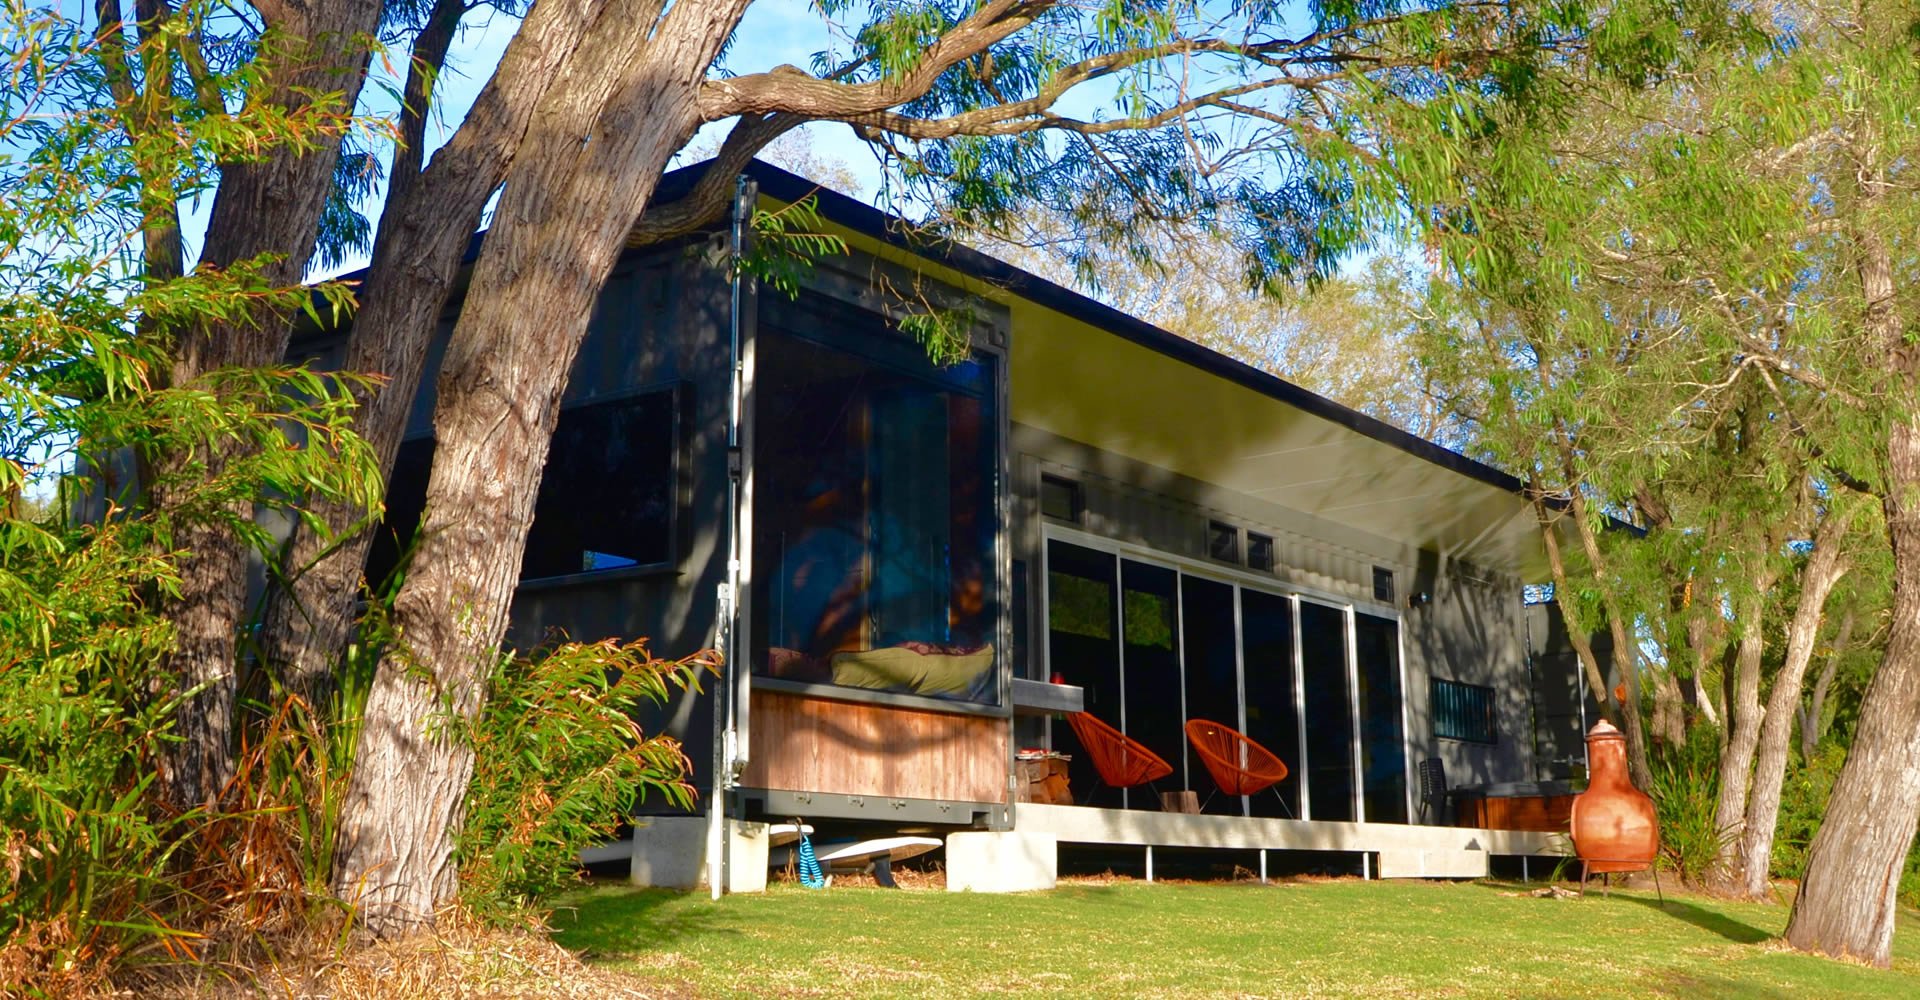 Shipping Container Homes Australia - Architects and designers literally